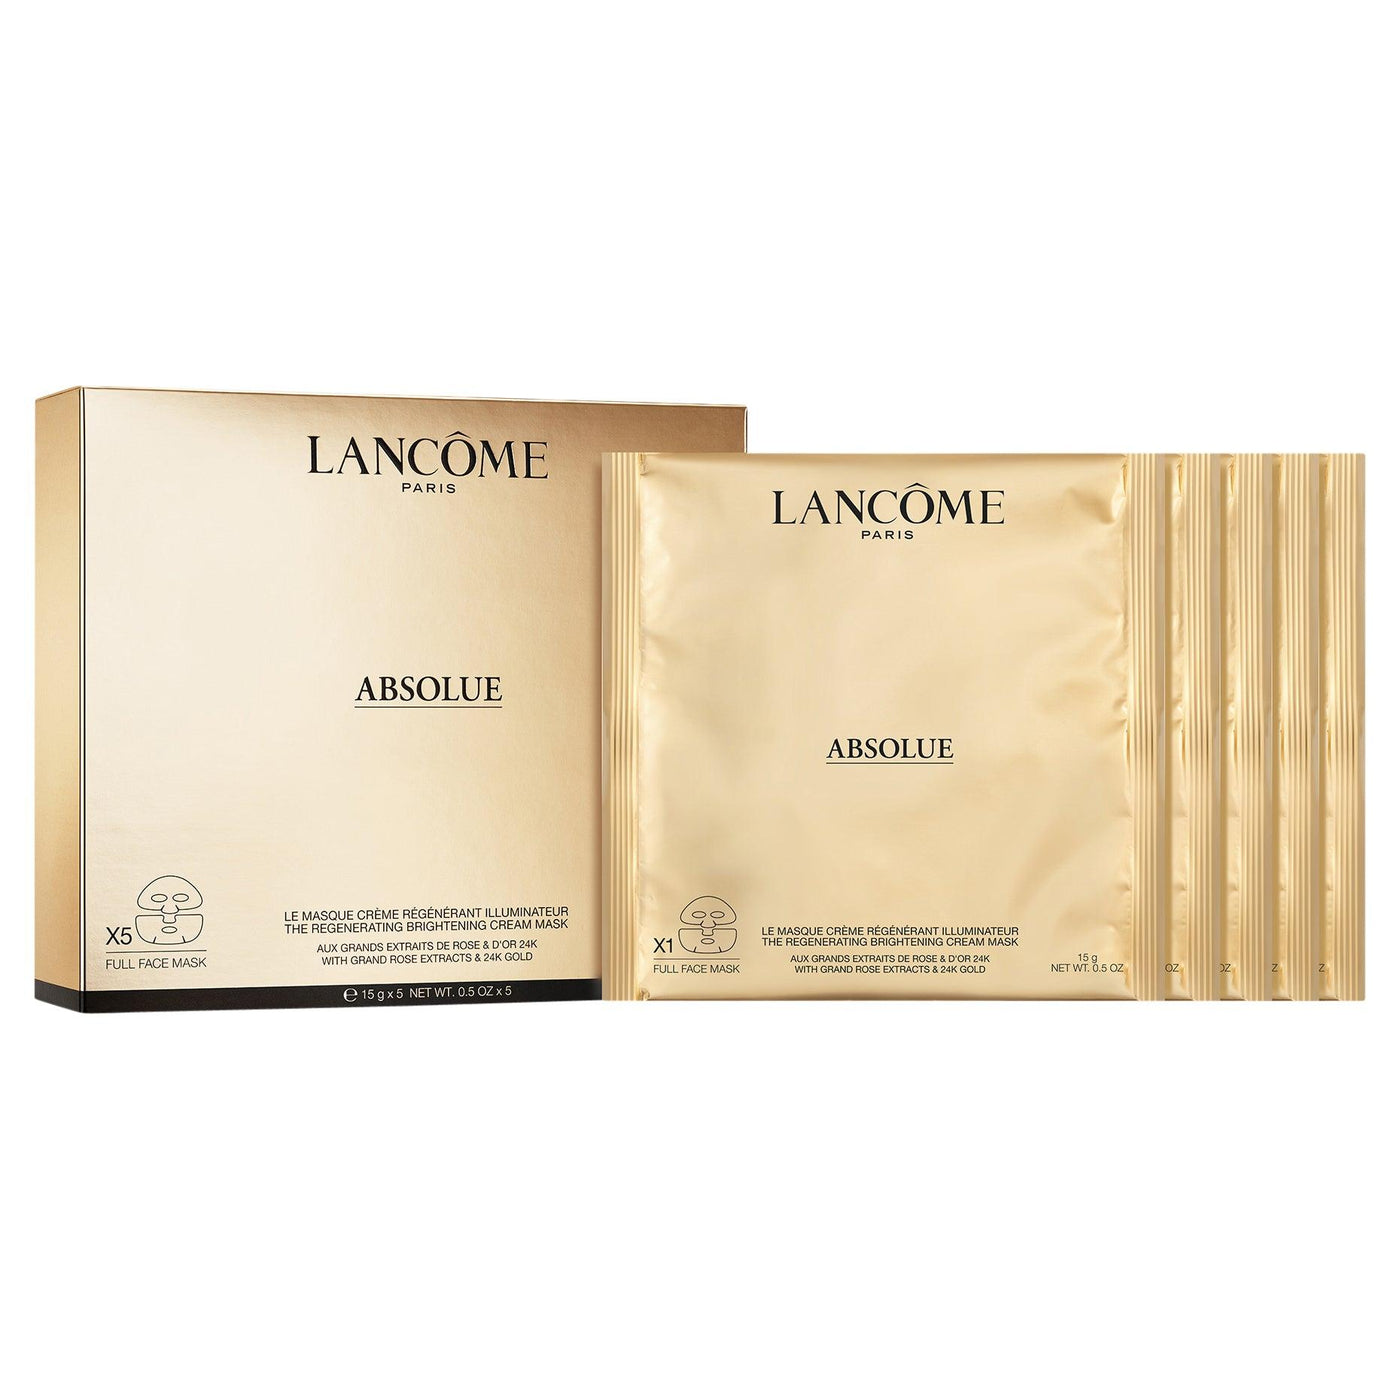 Lancome - Absolue Golden Cream Mask (15g x 5 masks) - Ascent Luxury Cosmetics